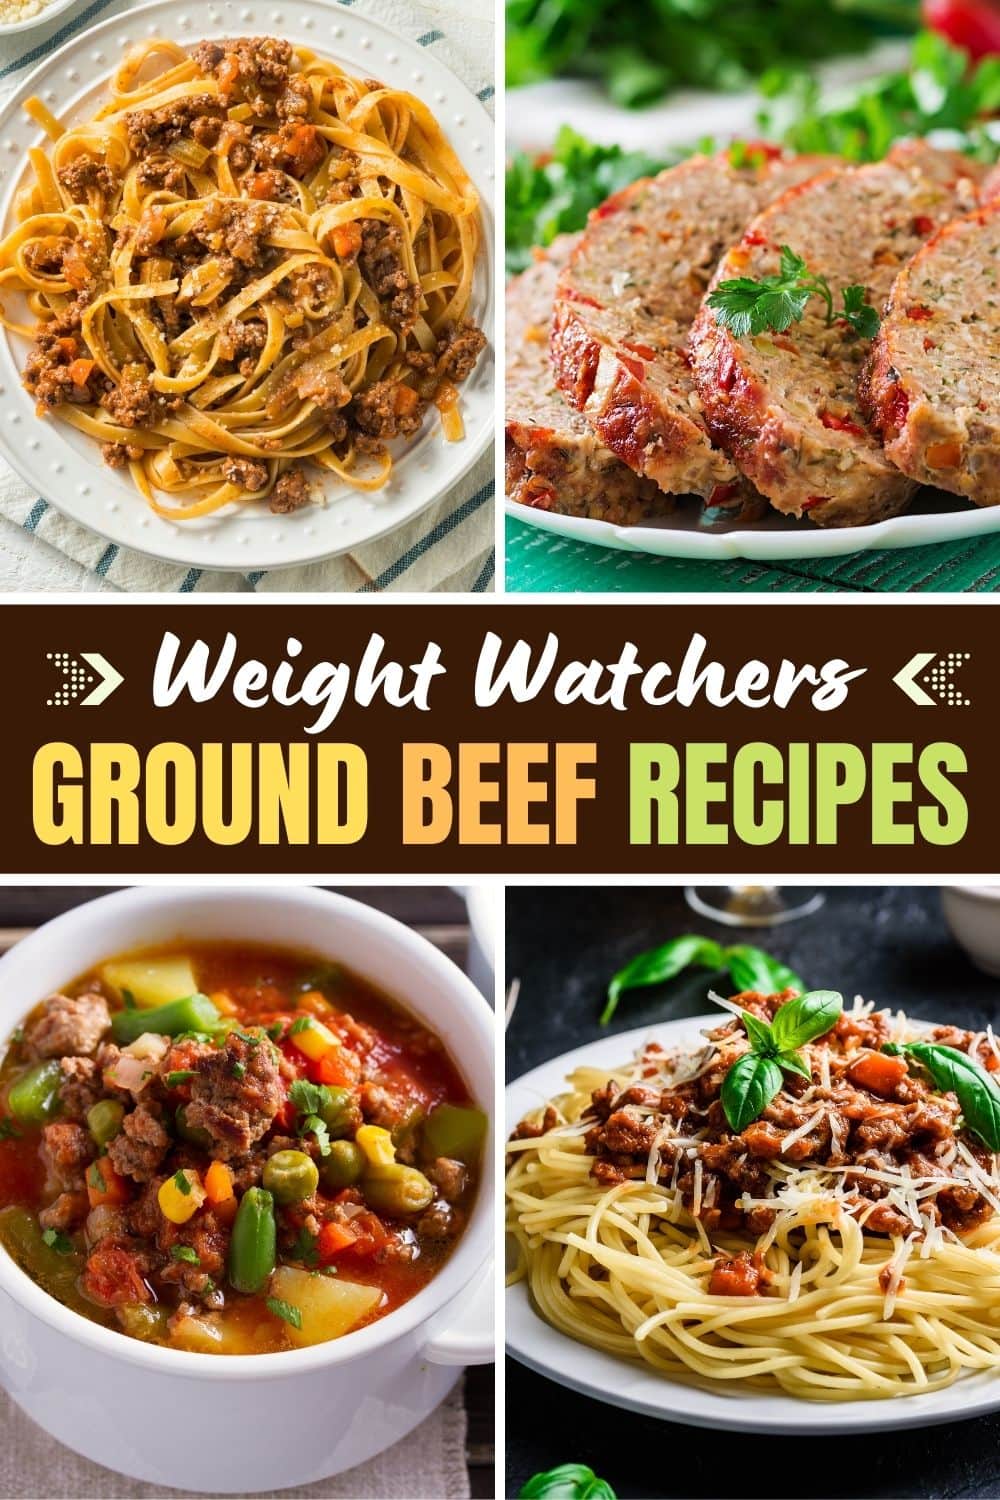 17 Easy Weight Watchers Ground Beef Recipes - Insanely Good